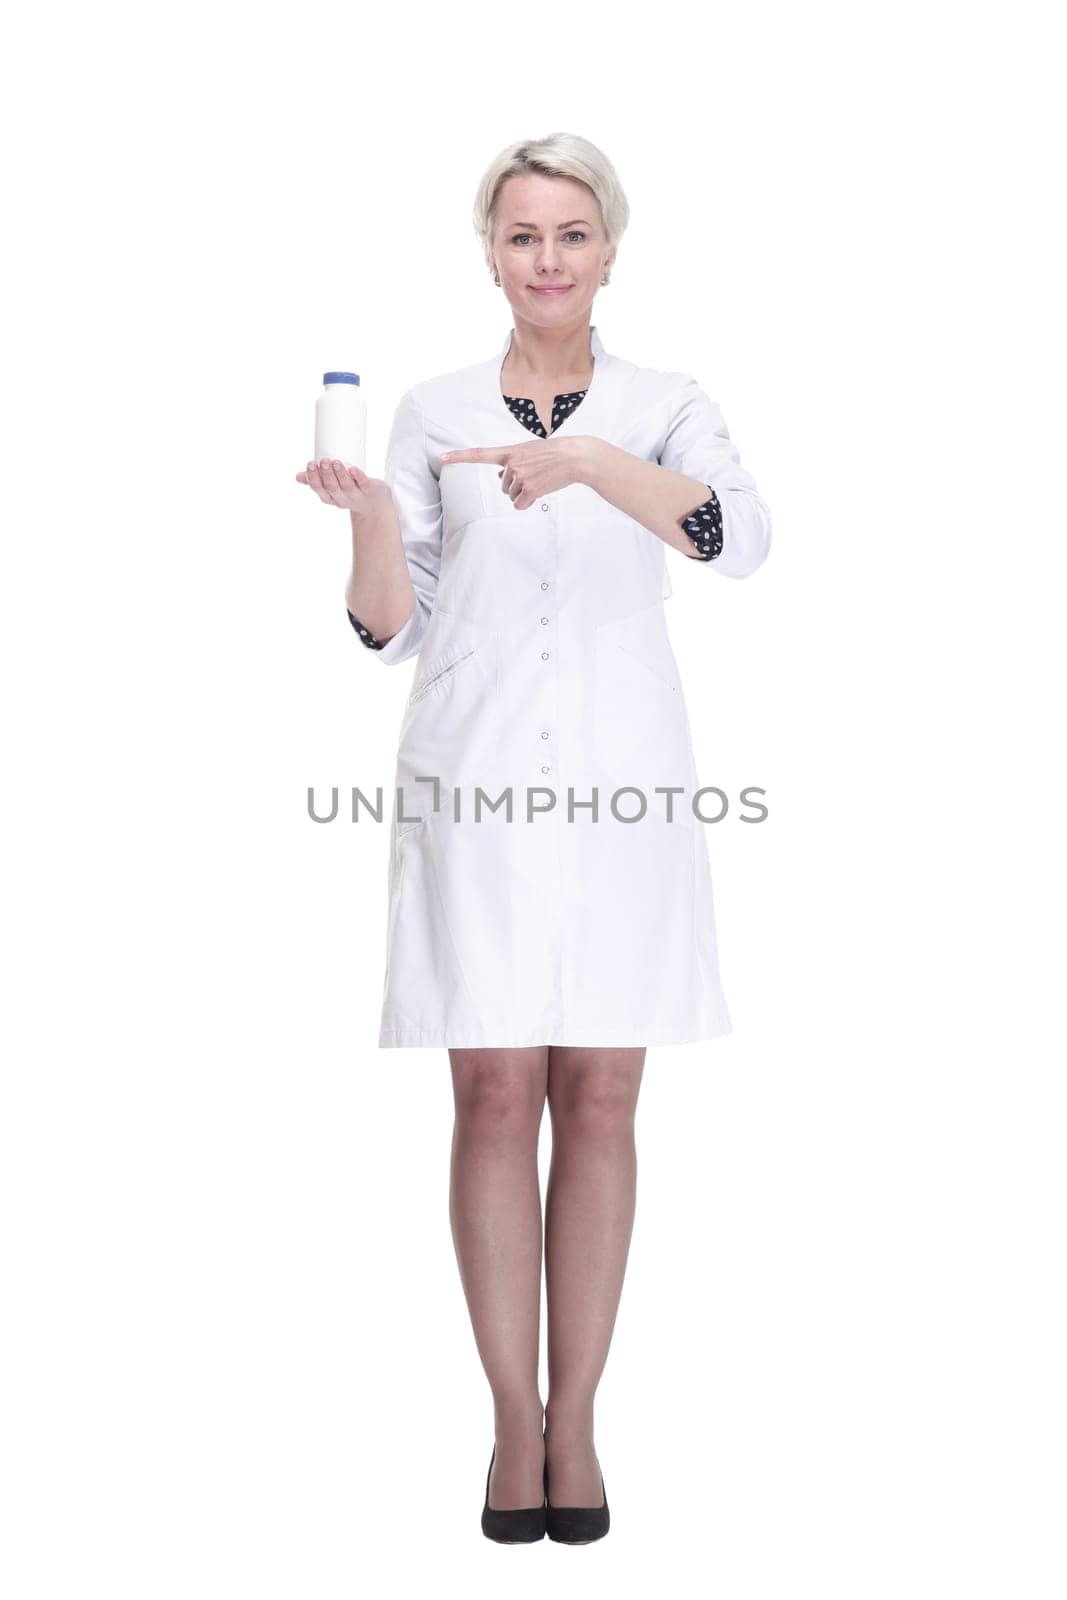 in full growth. female doctor holds a bottle of sanitizer. isolated on a white background.